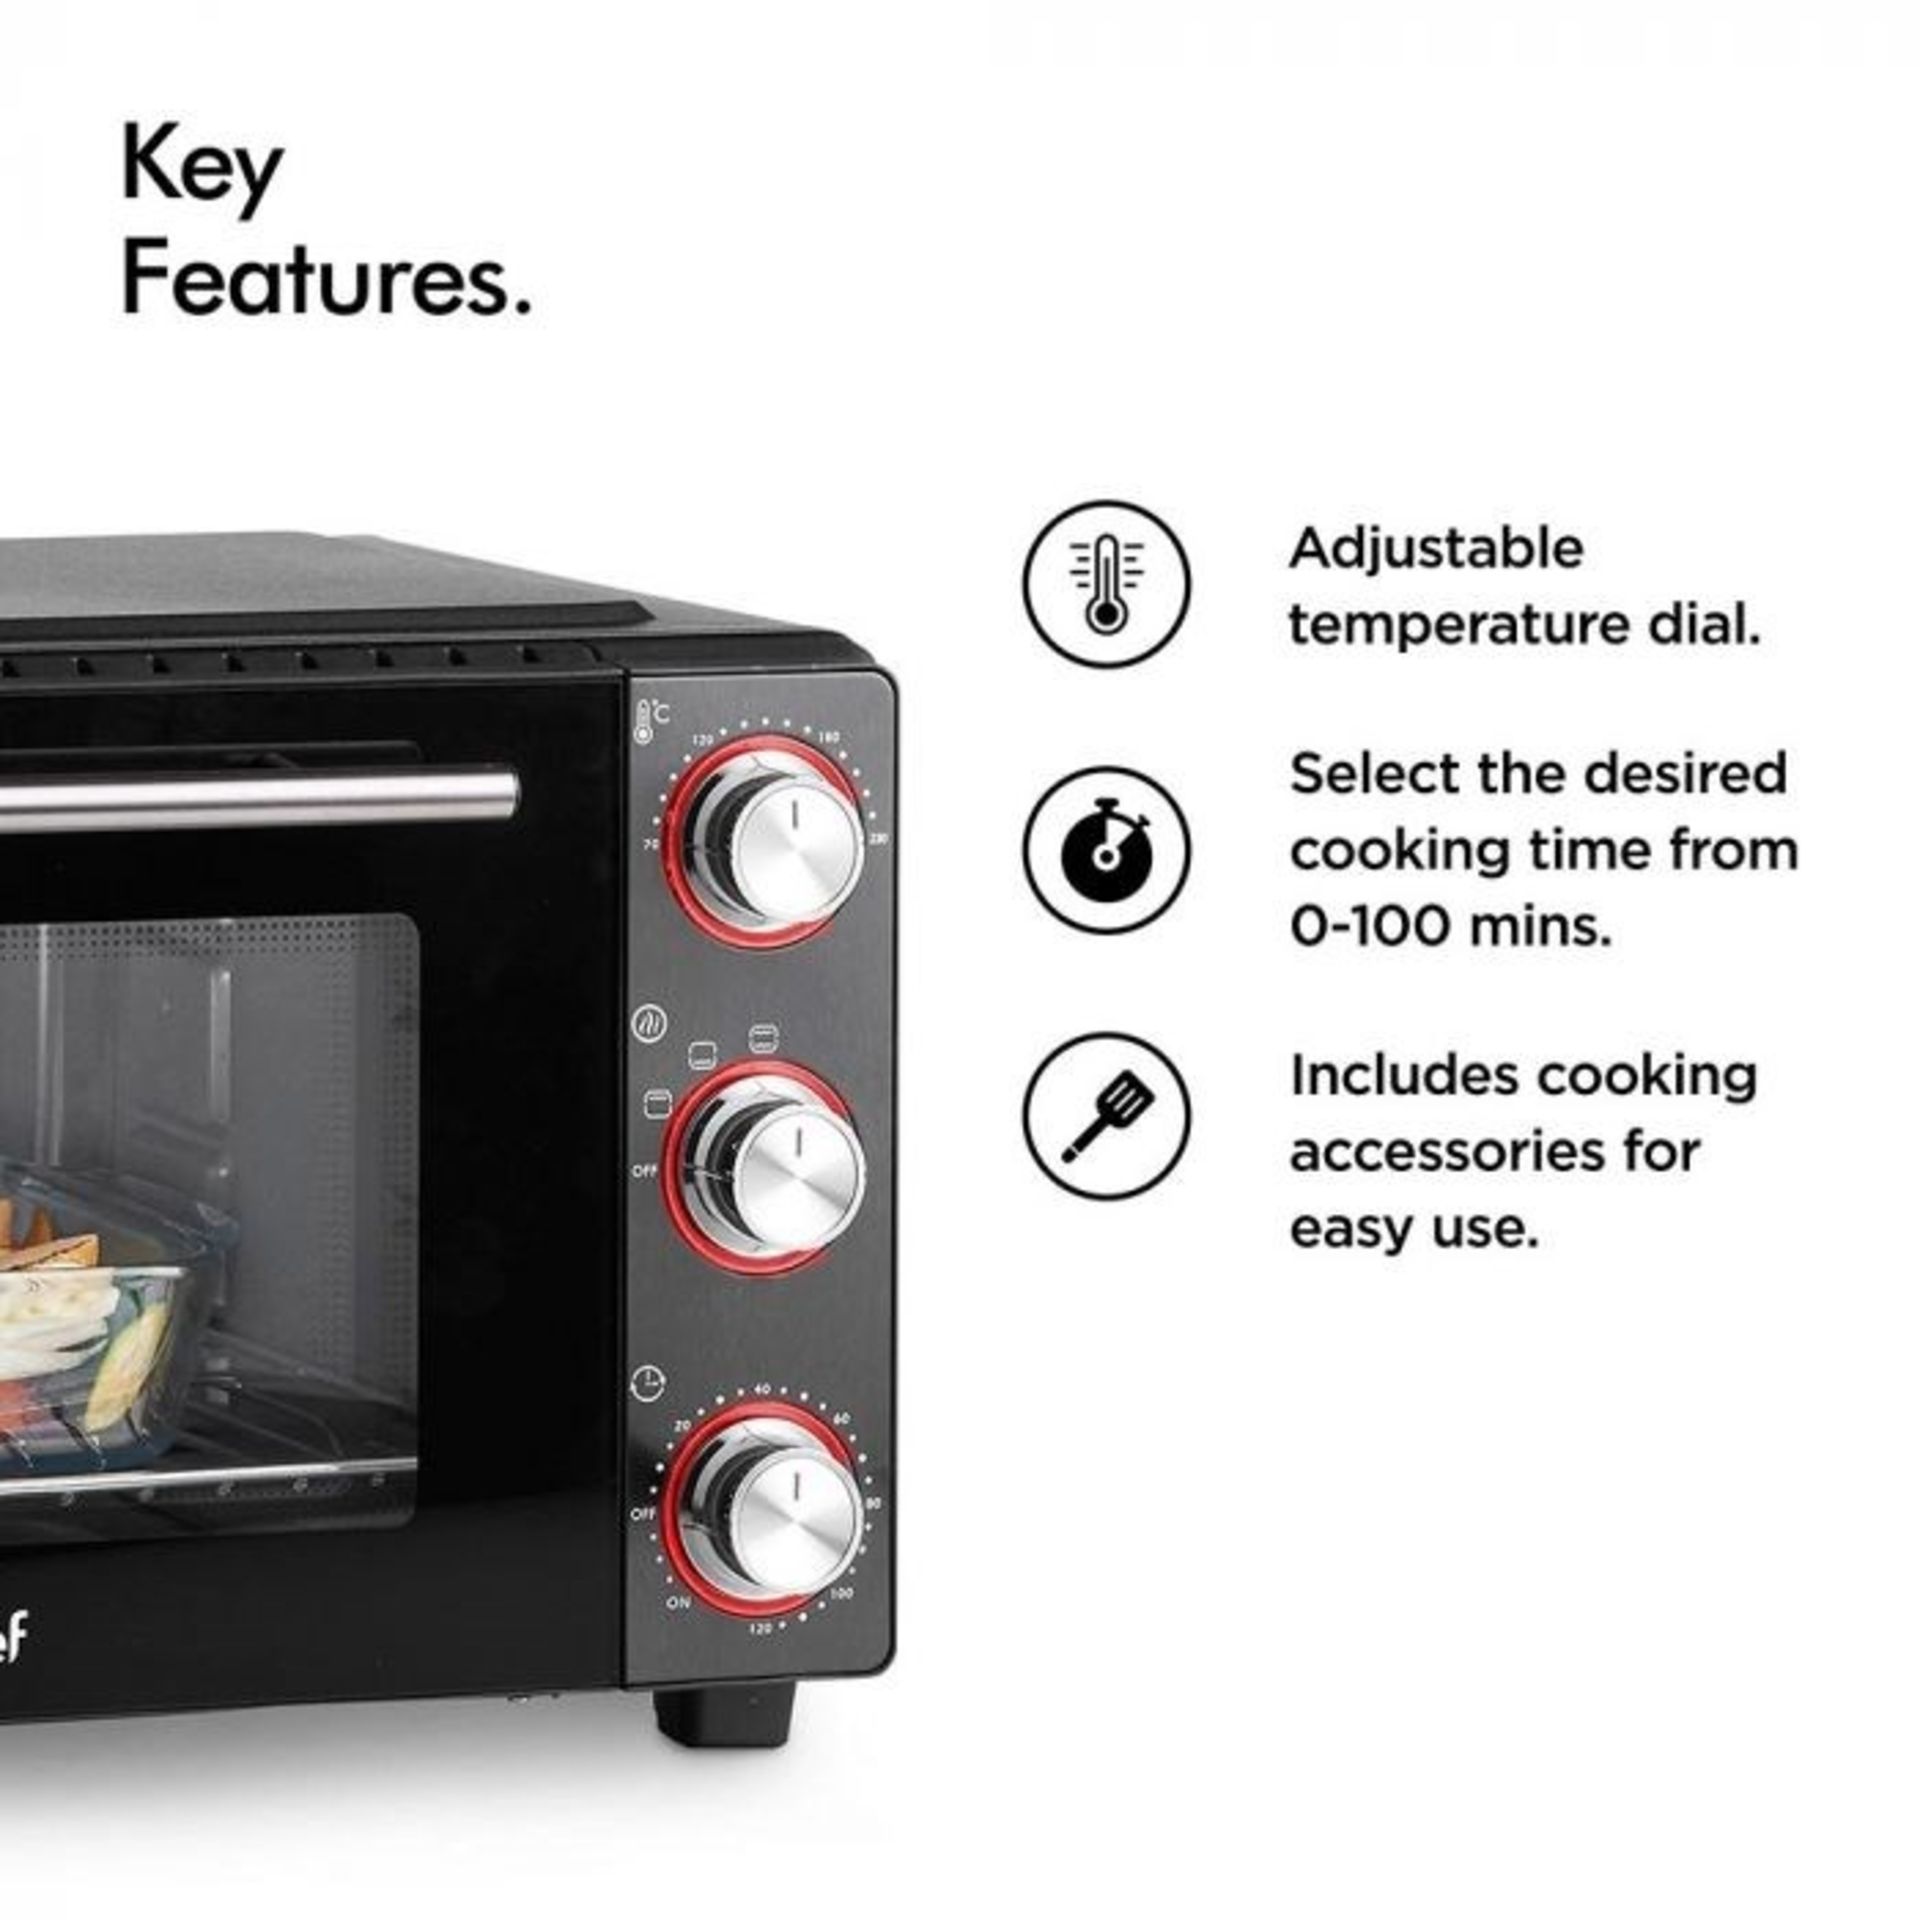 (S34) 28L Mini Oven Cooker & Grill 28L capacity and unobtrusive size makes it ideal for spaces... - Image 3 of 4